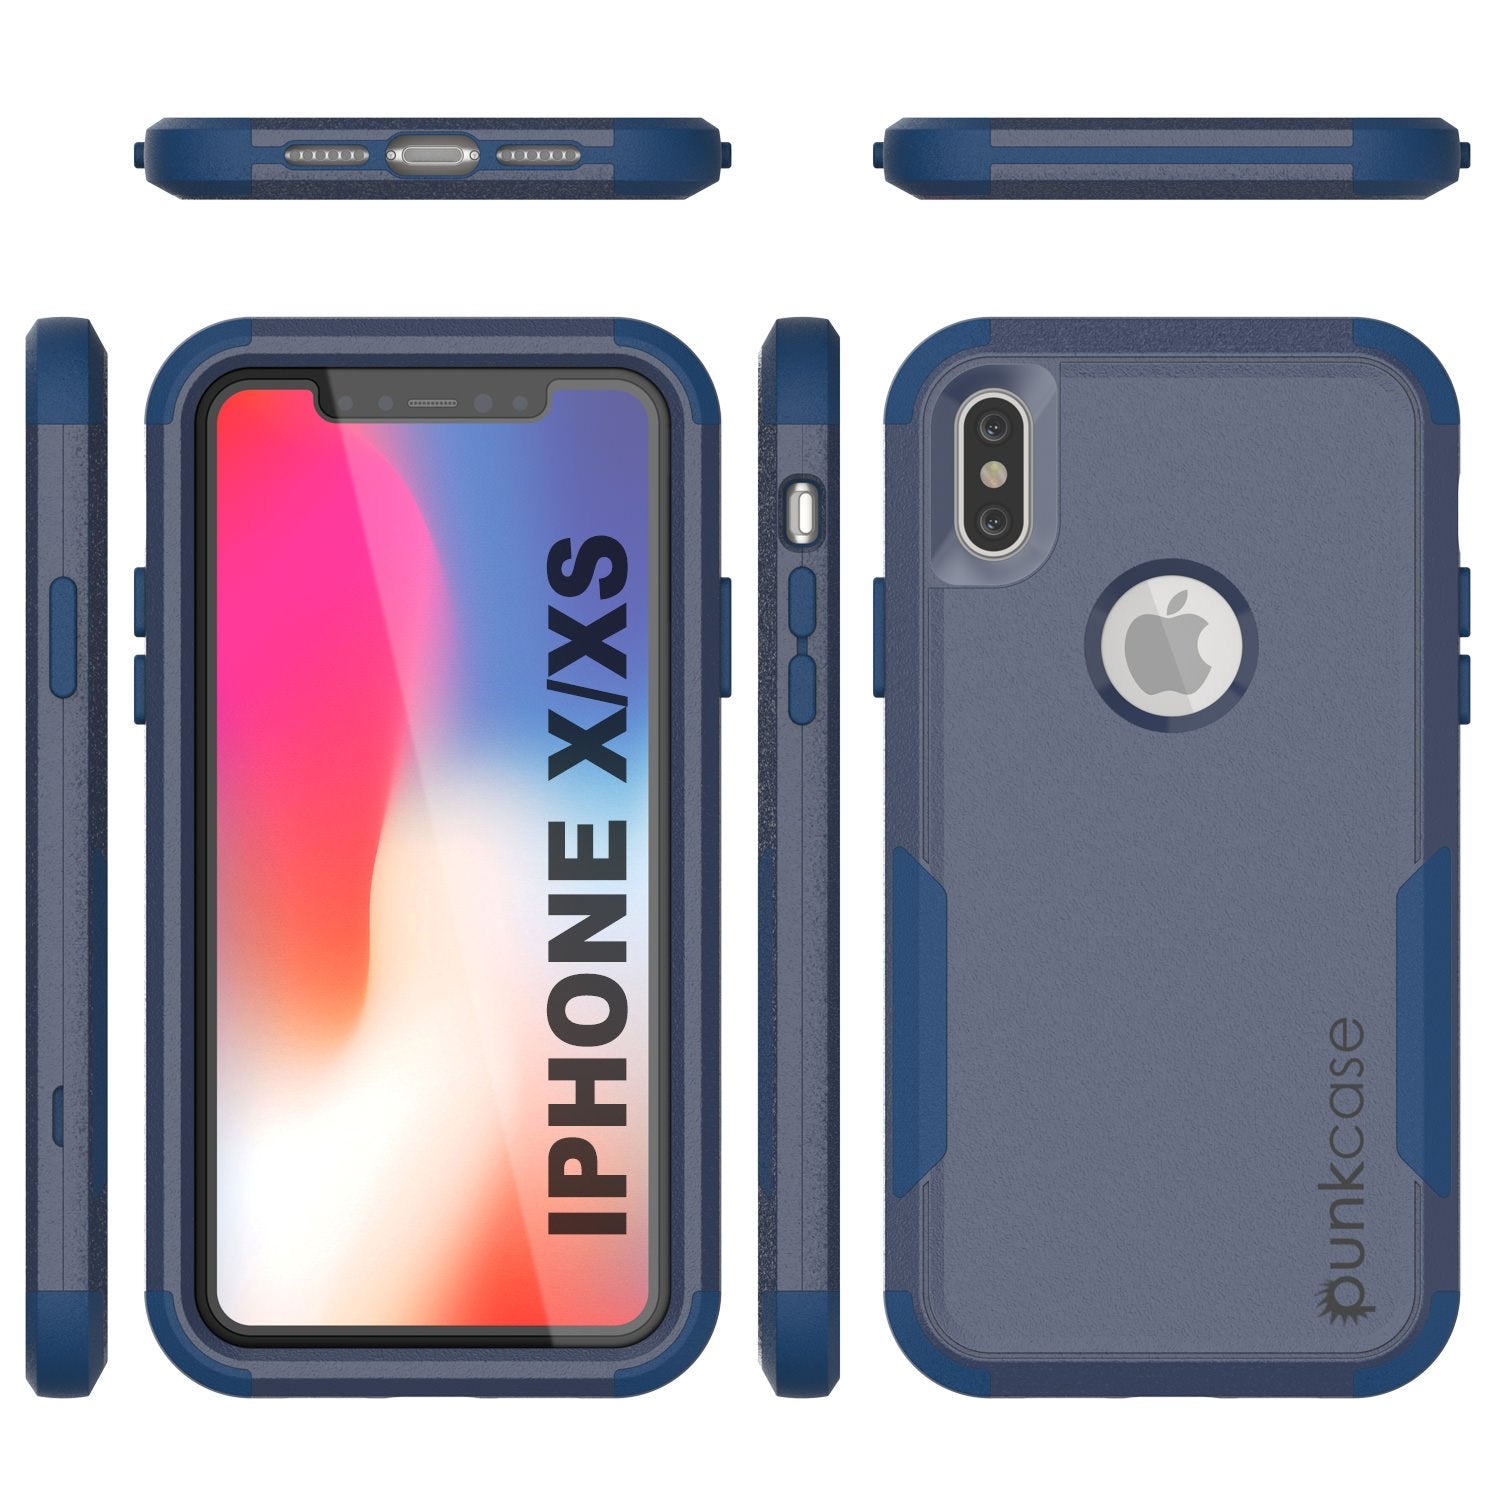 Punkcase for iPhone X Belt Clip Multilayer Holster Case [Patron Series] [Navy]